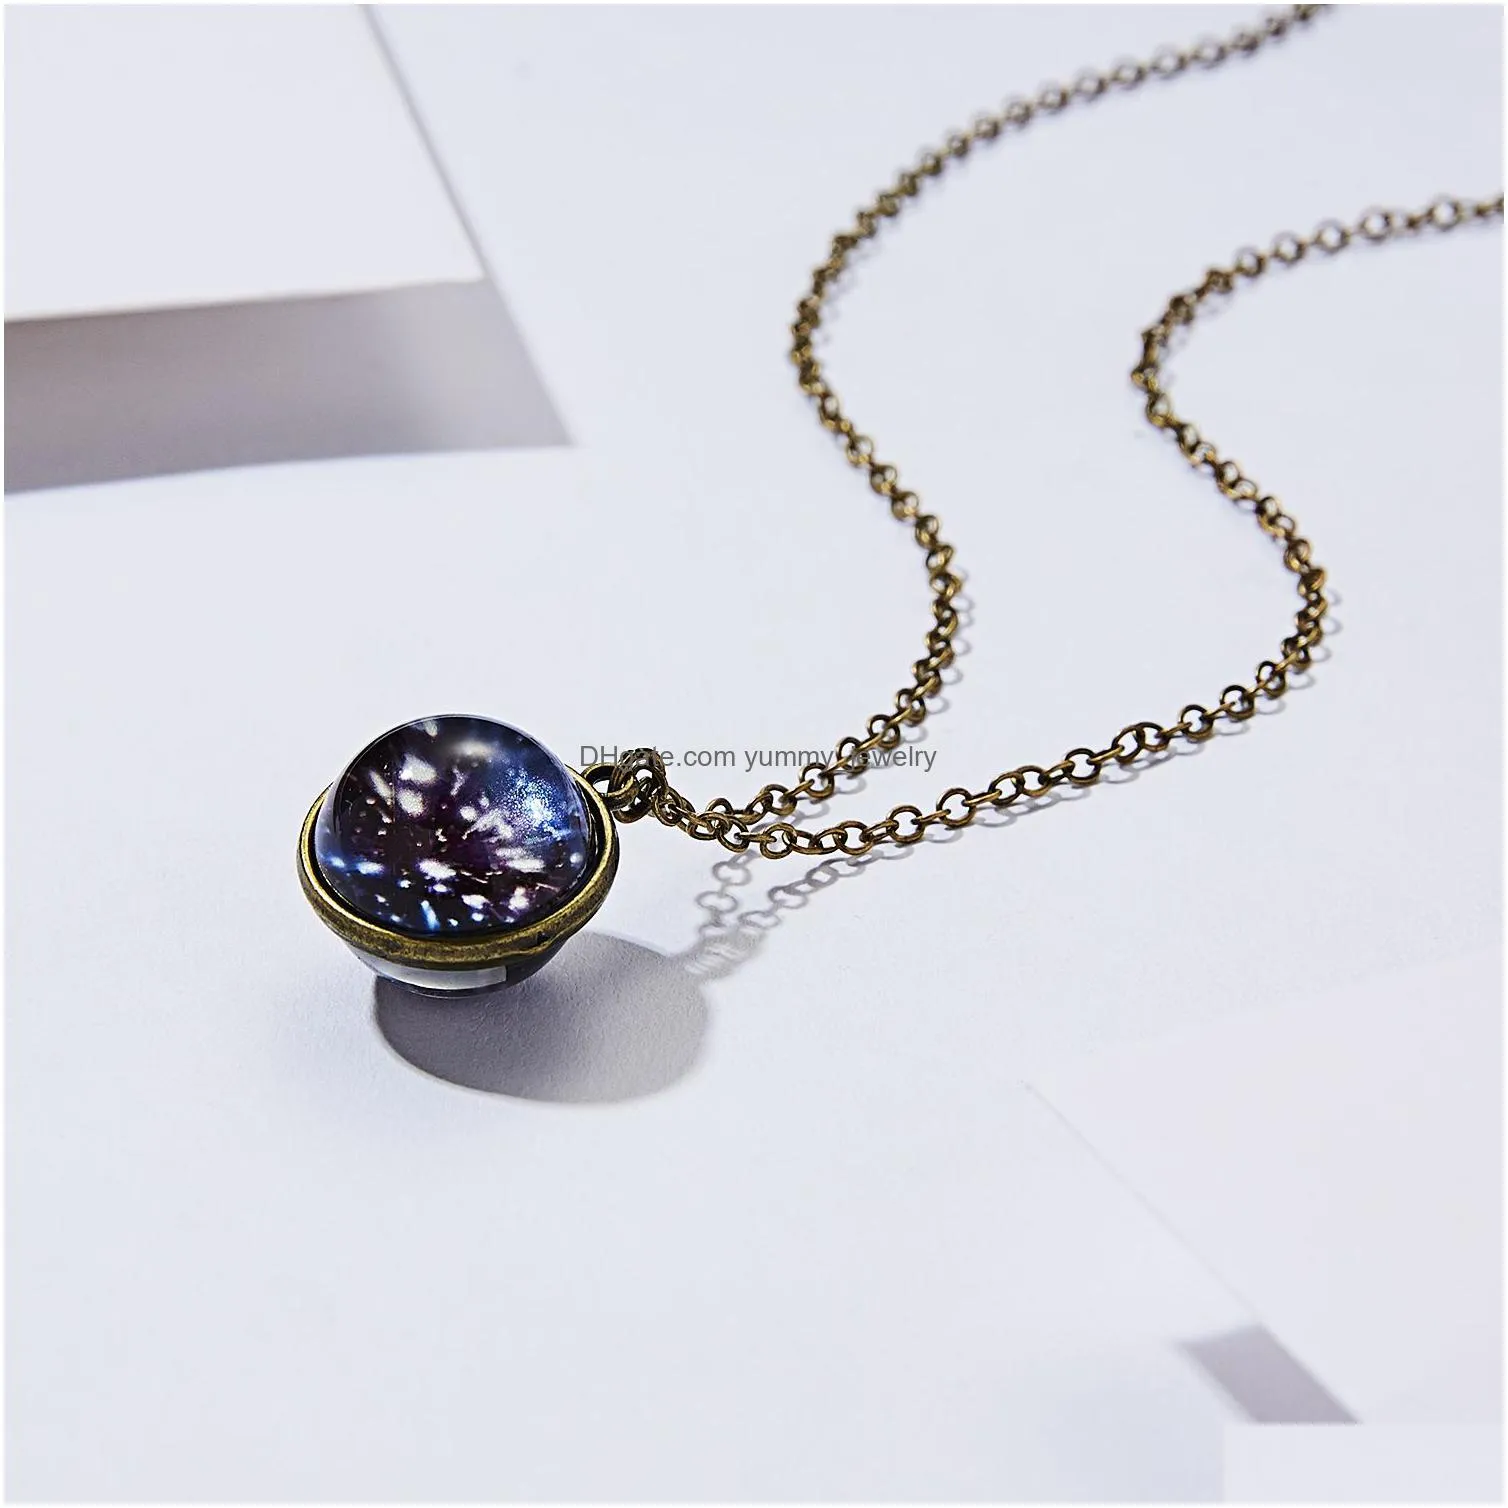 Pendant Necklaces Voleaf Fancy Starry Moon Earth Planet Pendant Necklace Round Glowing In The Dark Glass Ball Women Jewelry For Girl G Dh5F9